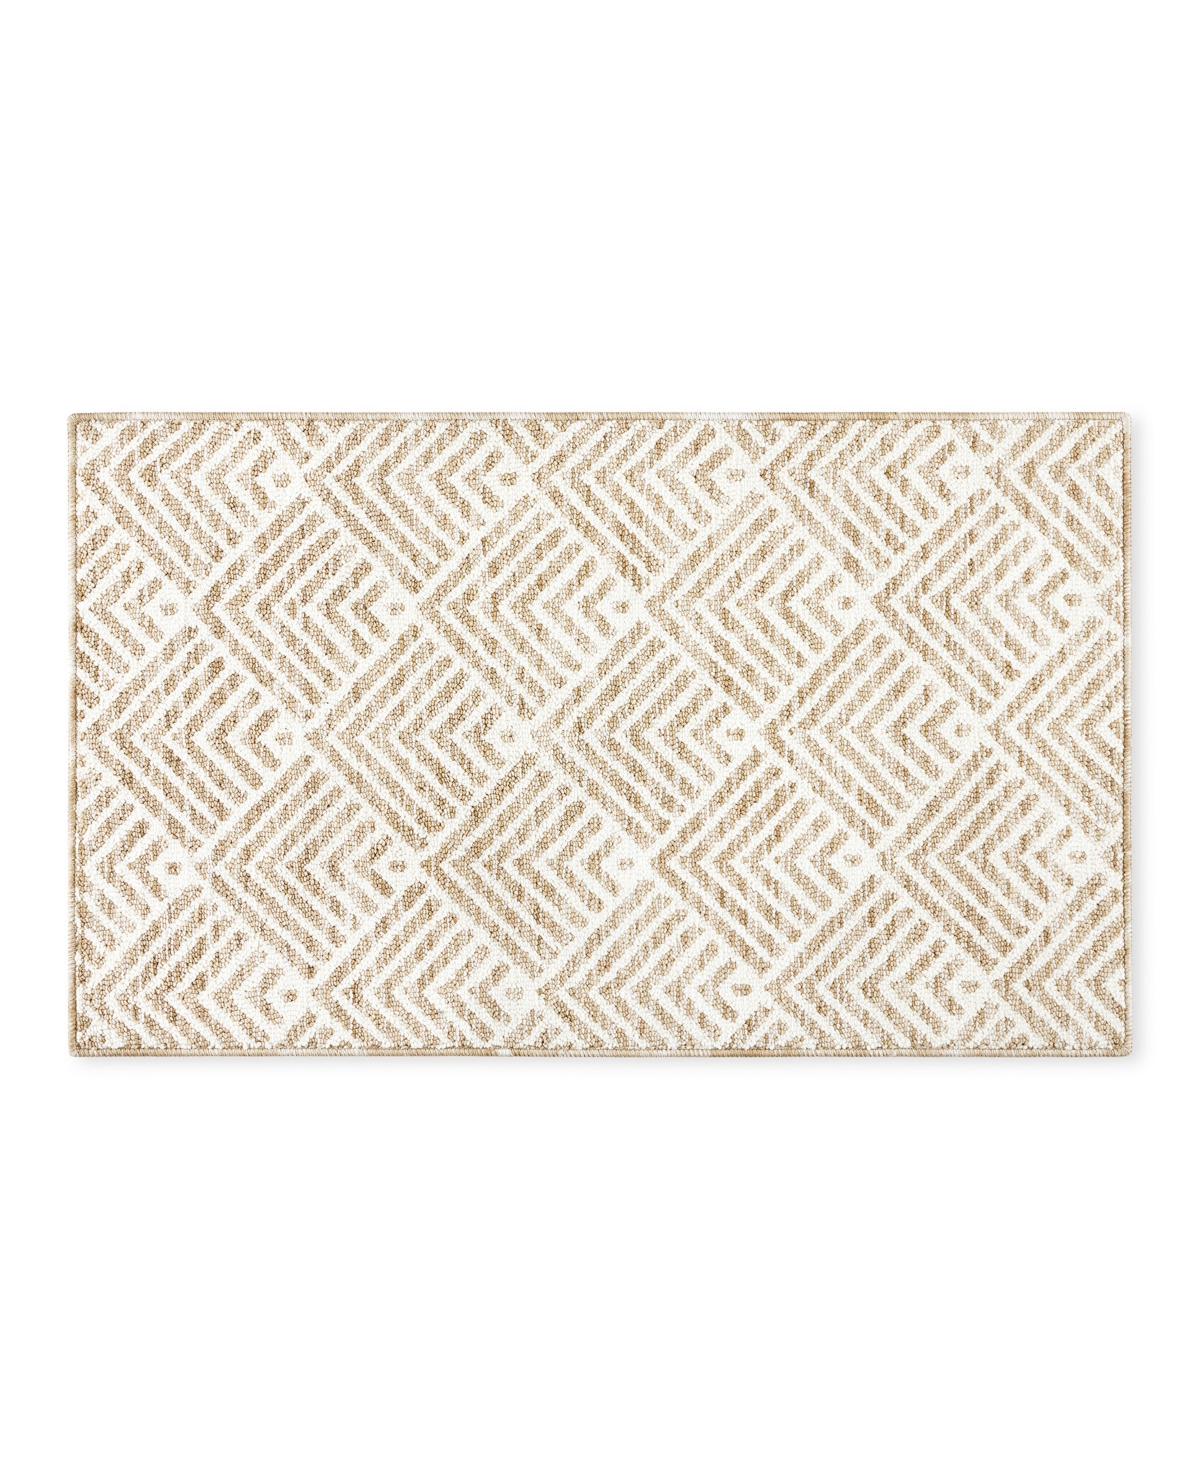 Town & Country Living Everyday Walker Everwash Kitchen Mat E003 2' X 3'4" Area Rug In Beige